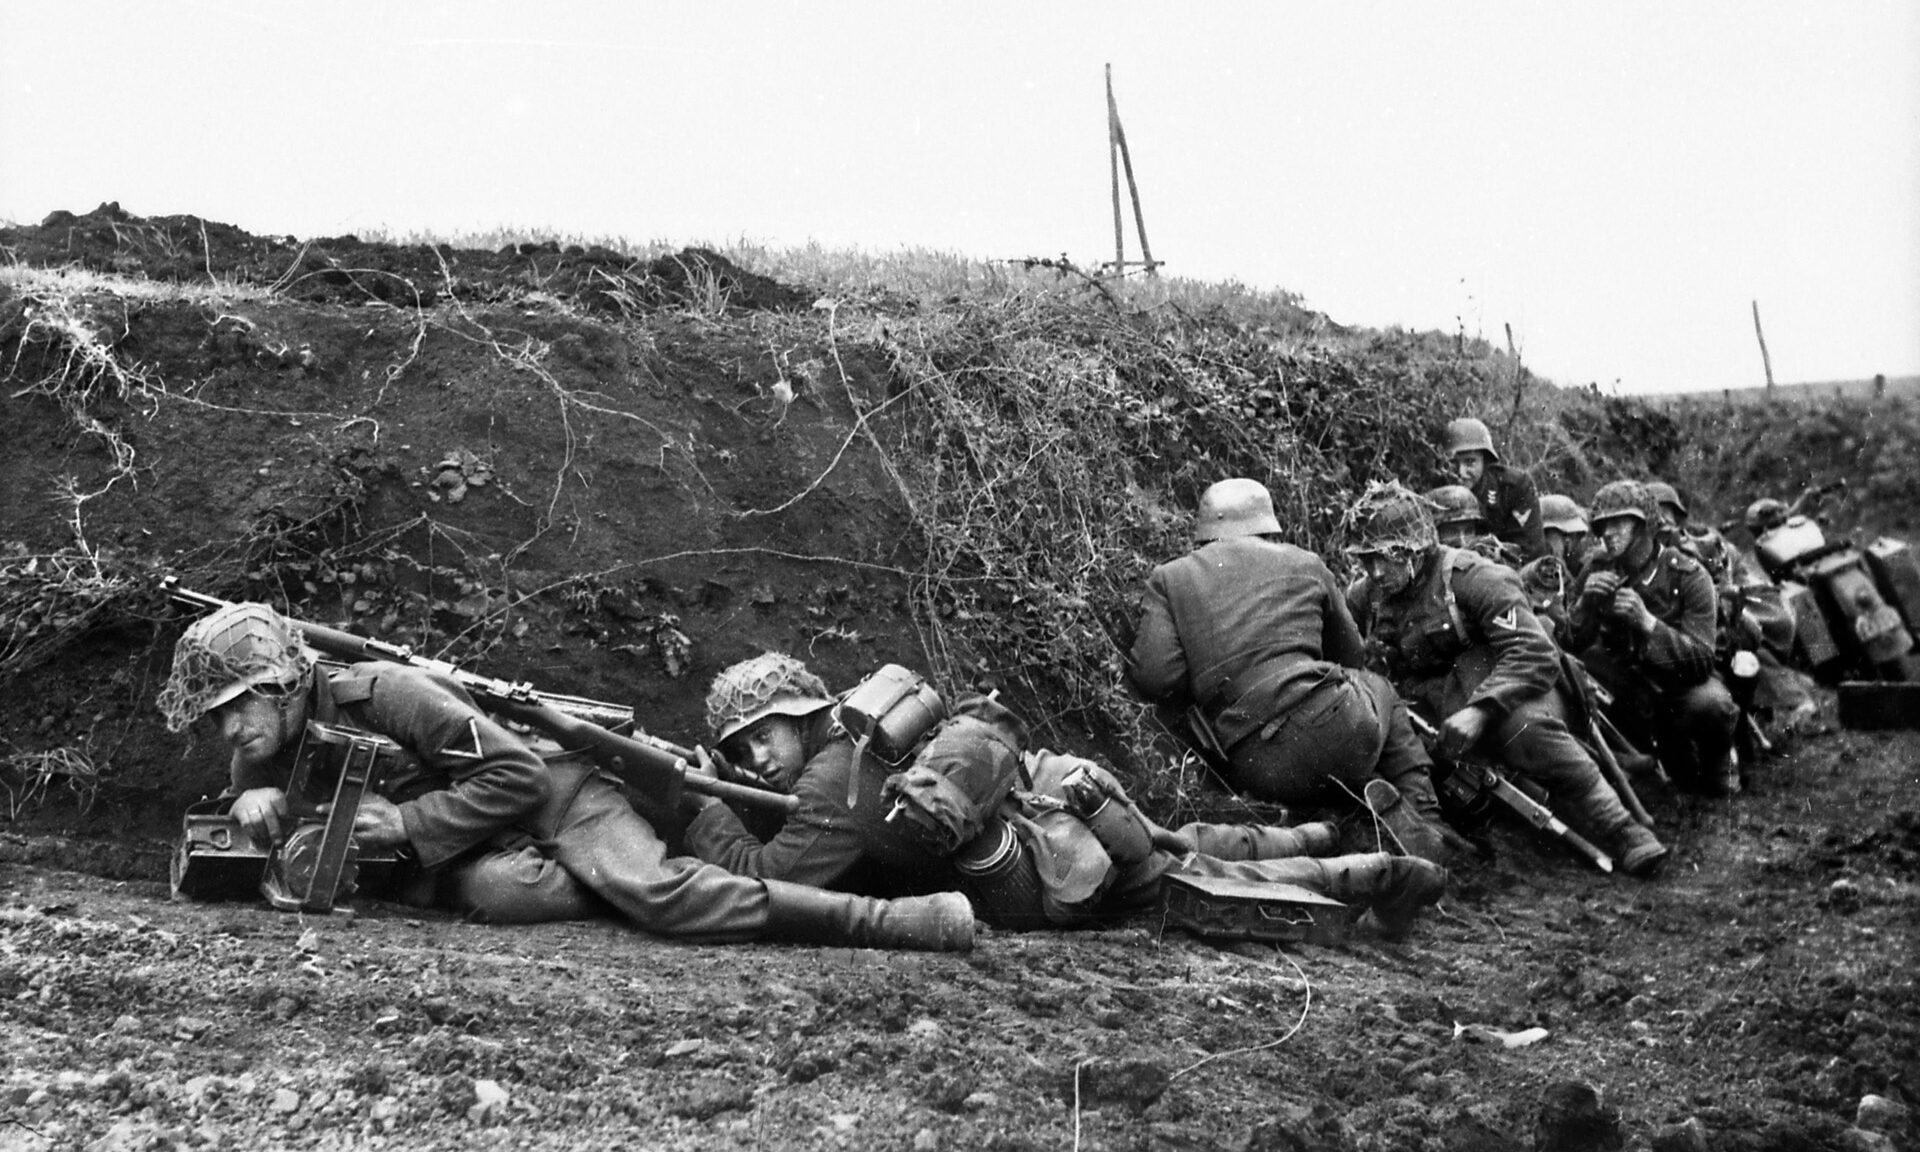 German infantrymen take cover from Allied shelling in a creekbed near Anzio. The Americans wondered if the German infantrymen were drunk when they attacked across the open ground.